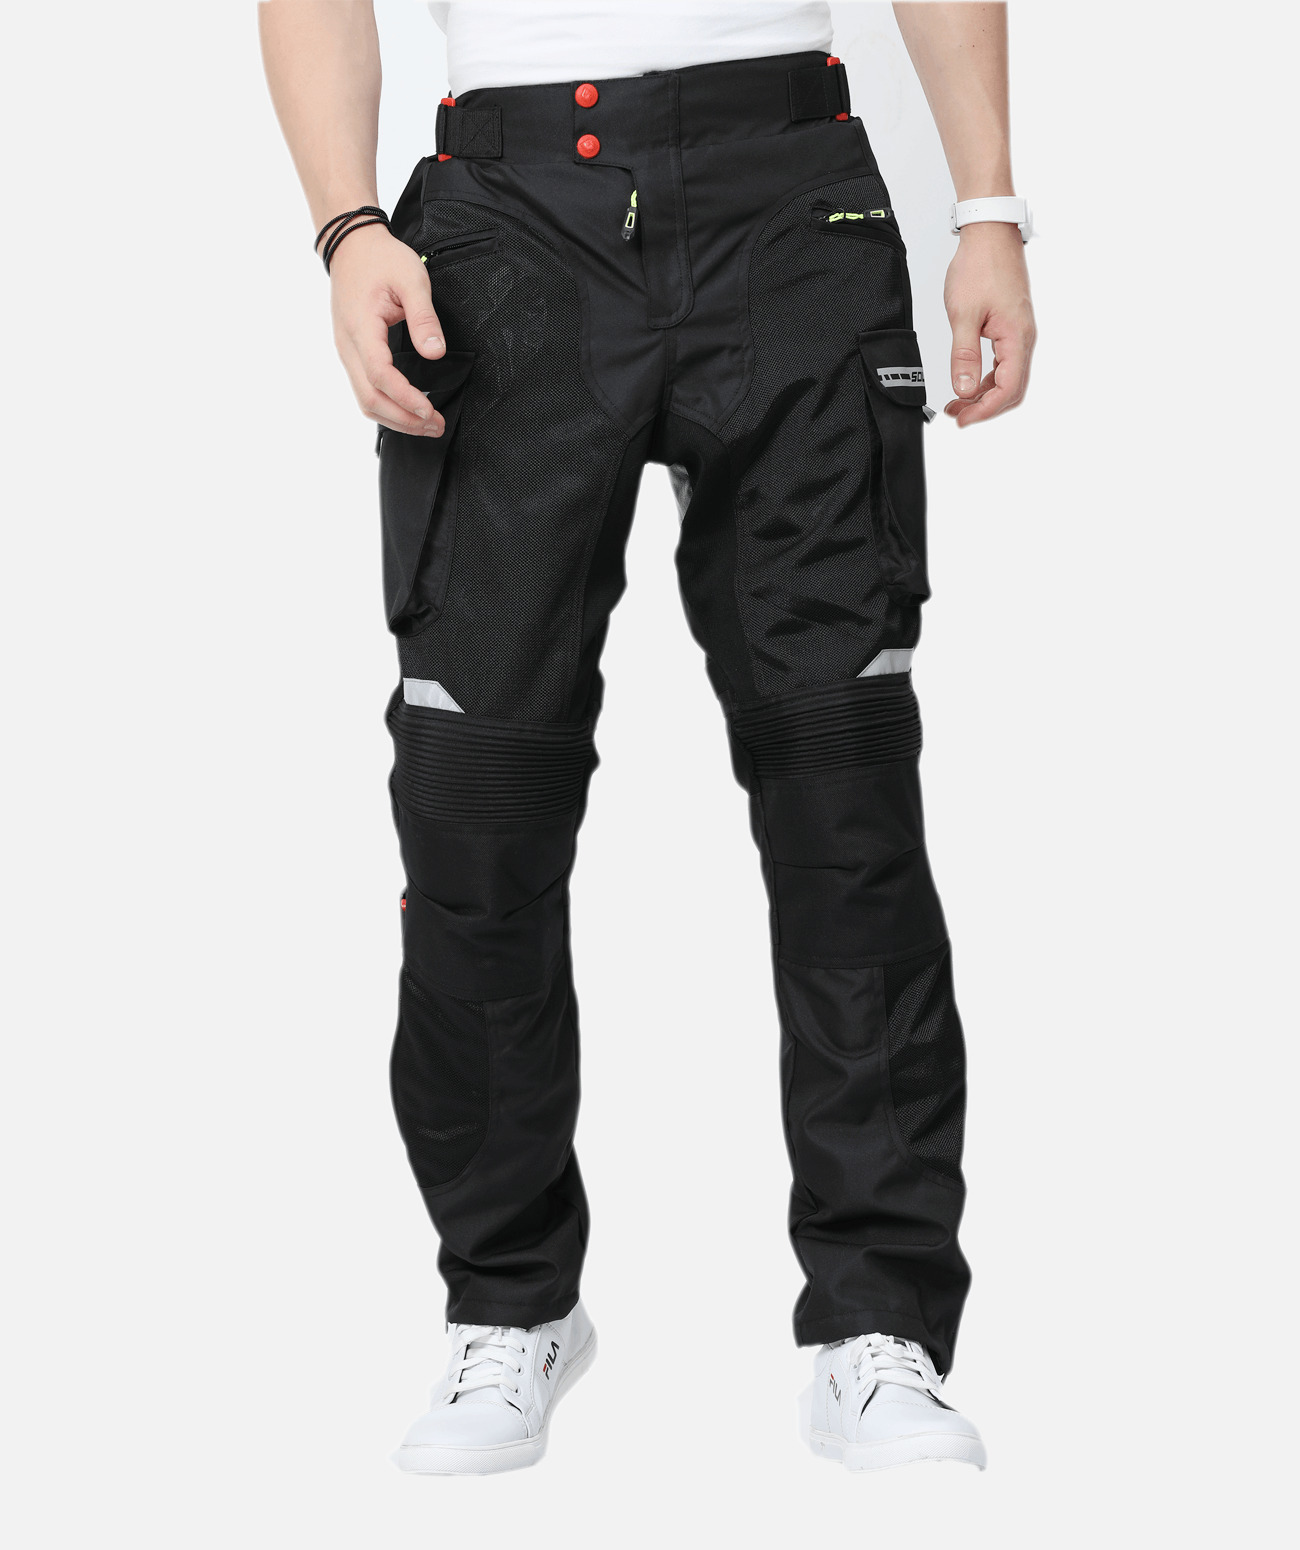 Iron Workers Rider Cargo Pants | 14% ($20.00) Off! - RevZilla